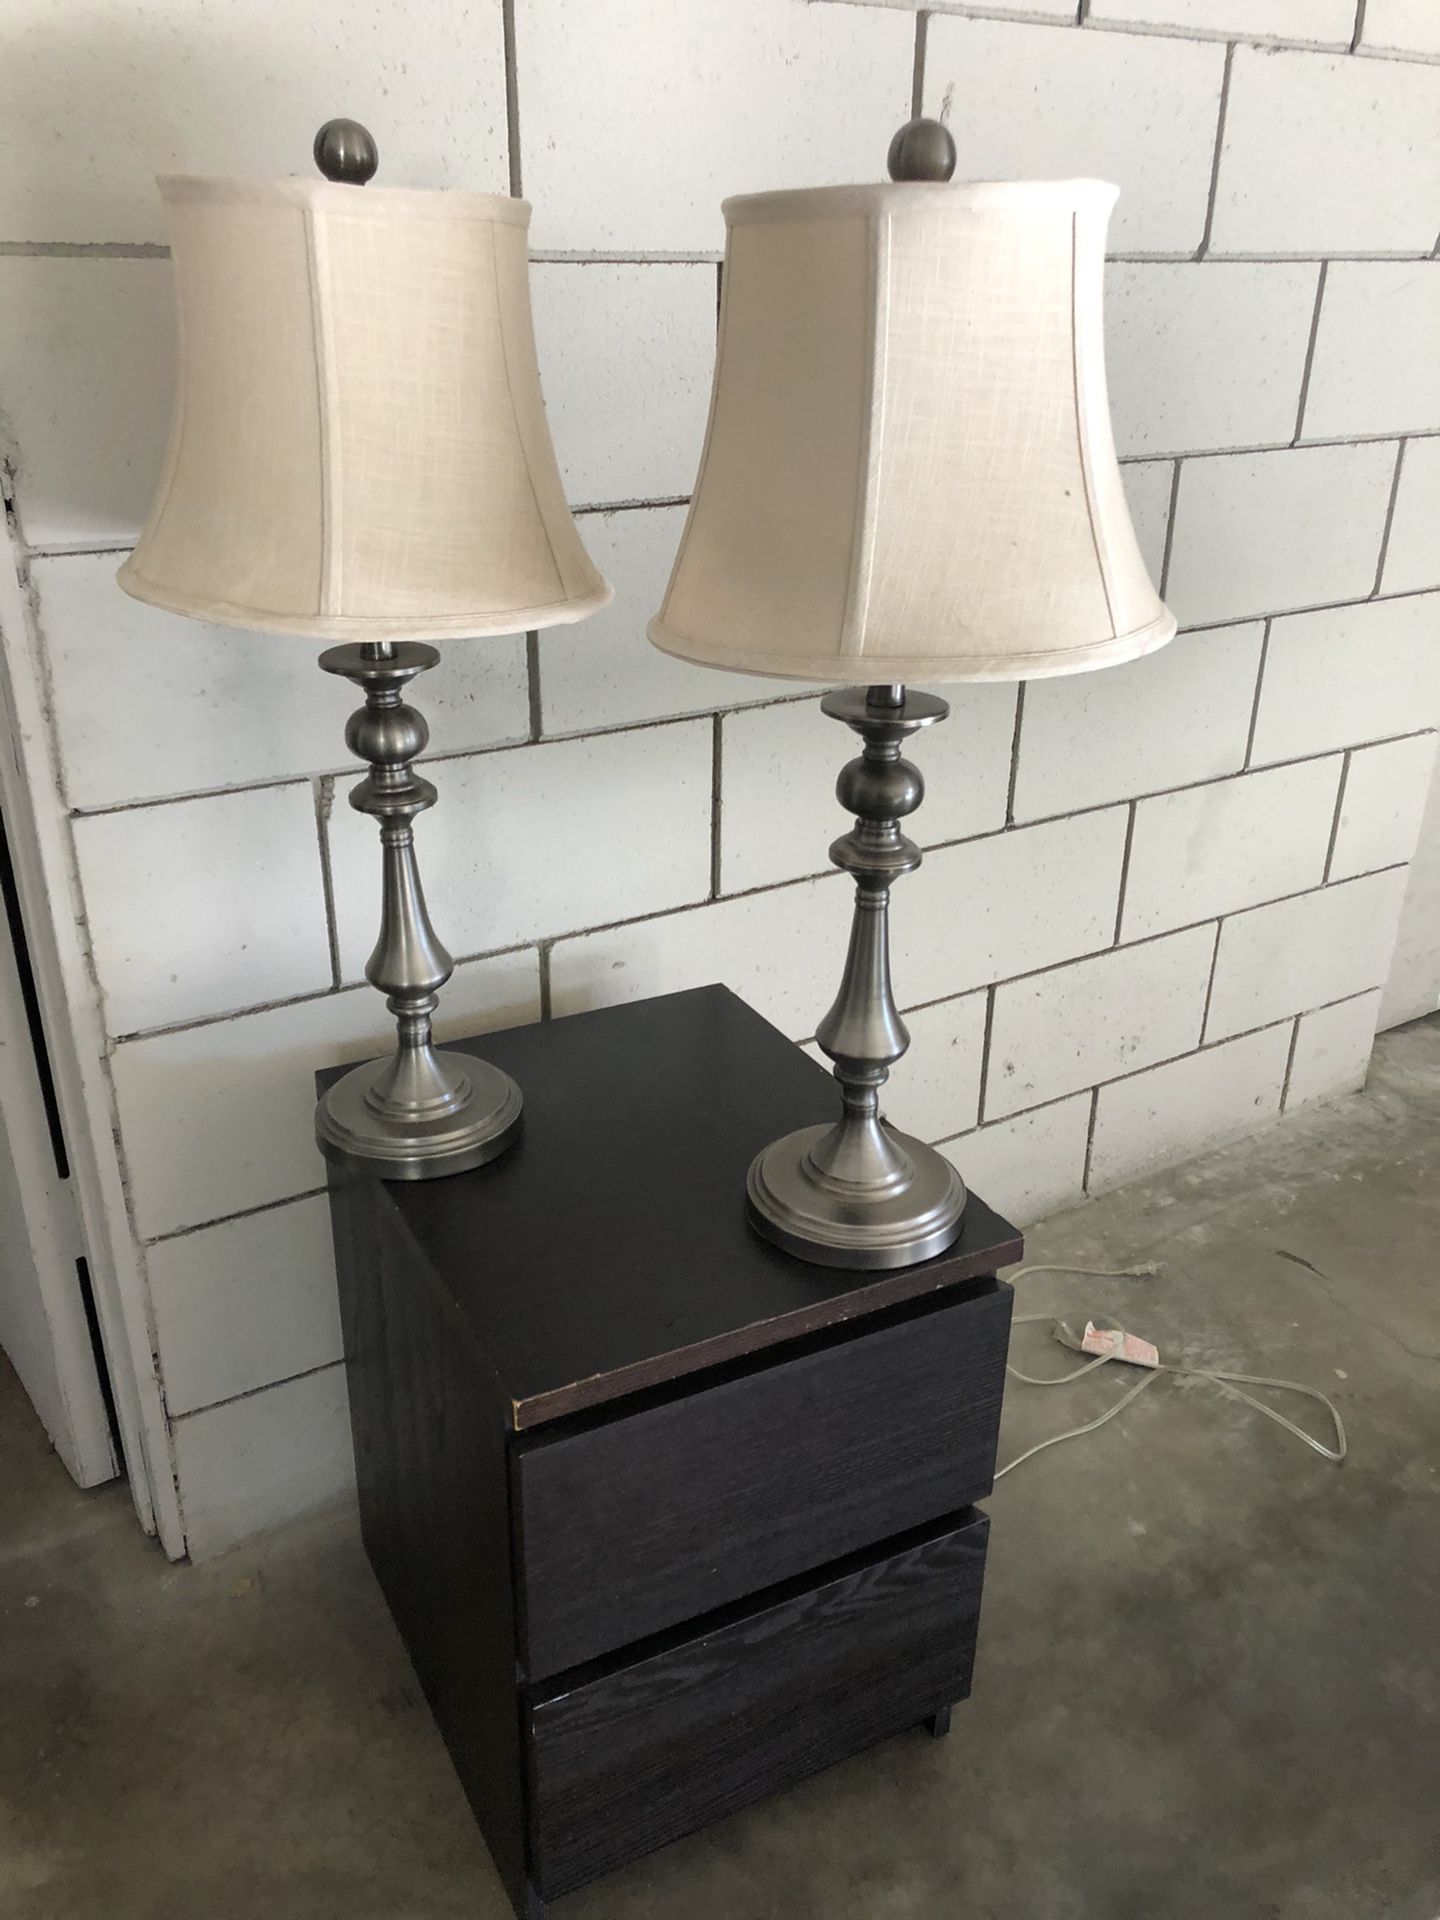 IKEA Night Stand With 2 Lamps